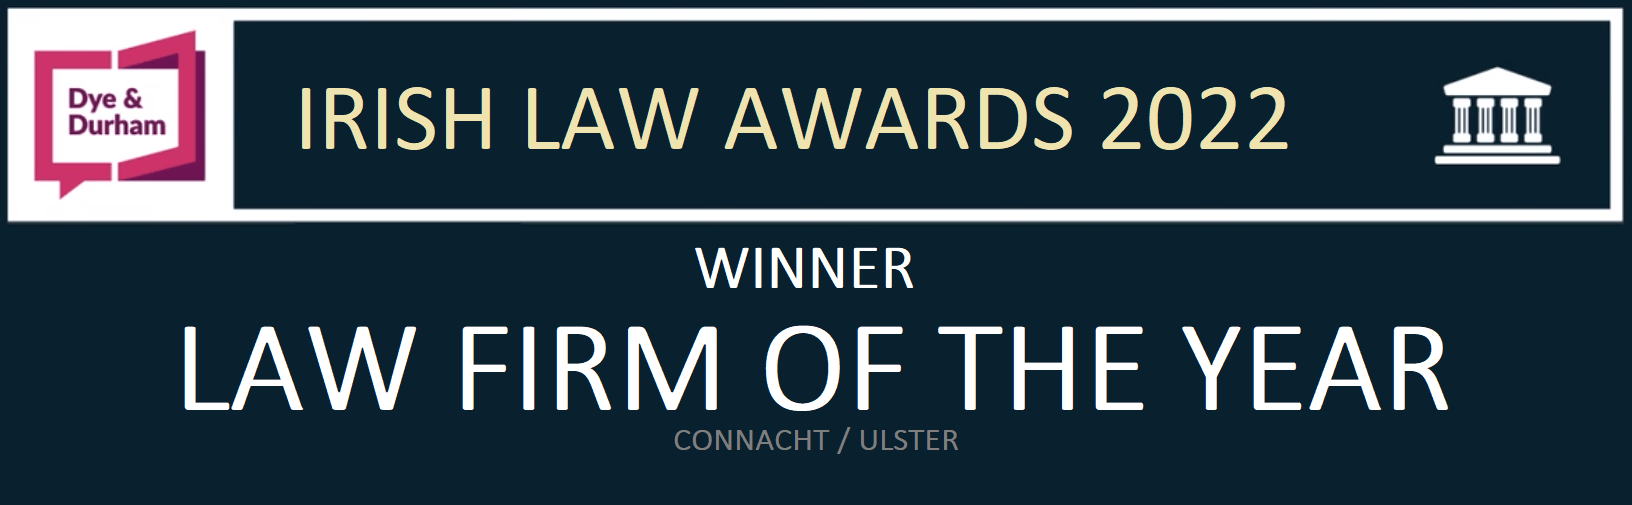 O'Donnell McKenna Solicitors Law fFrm of the year 2022